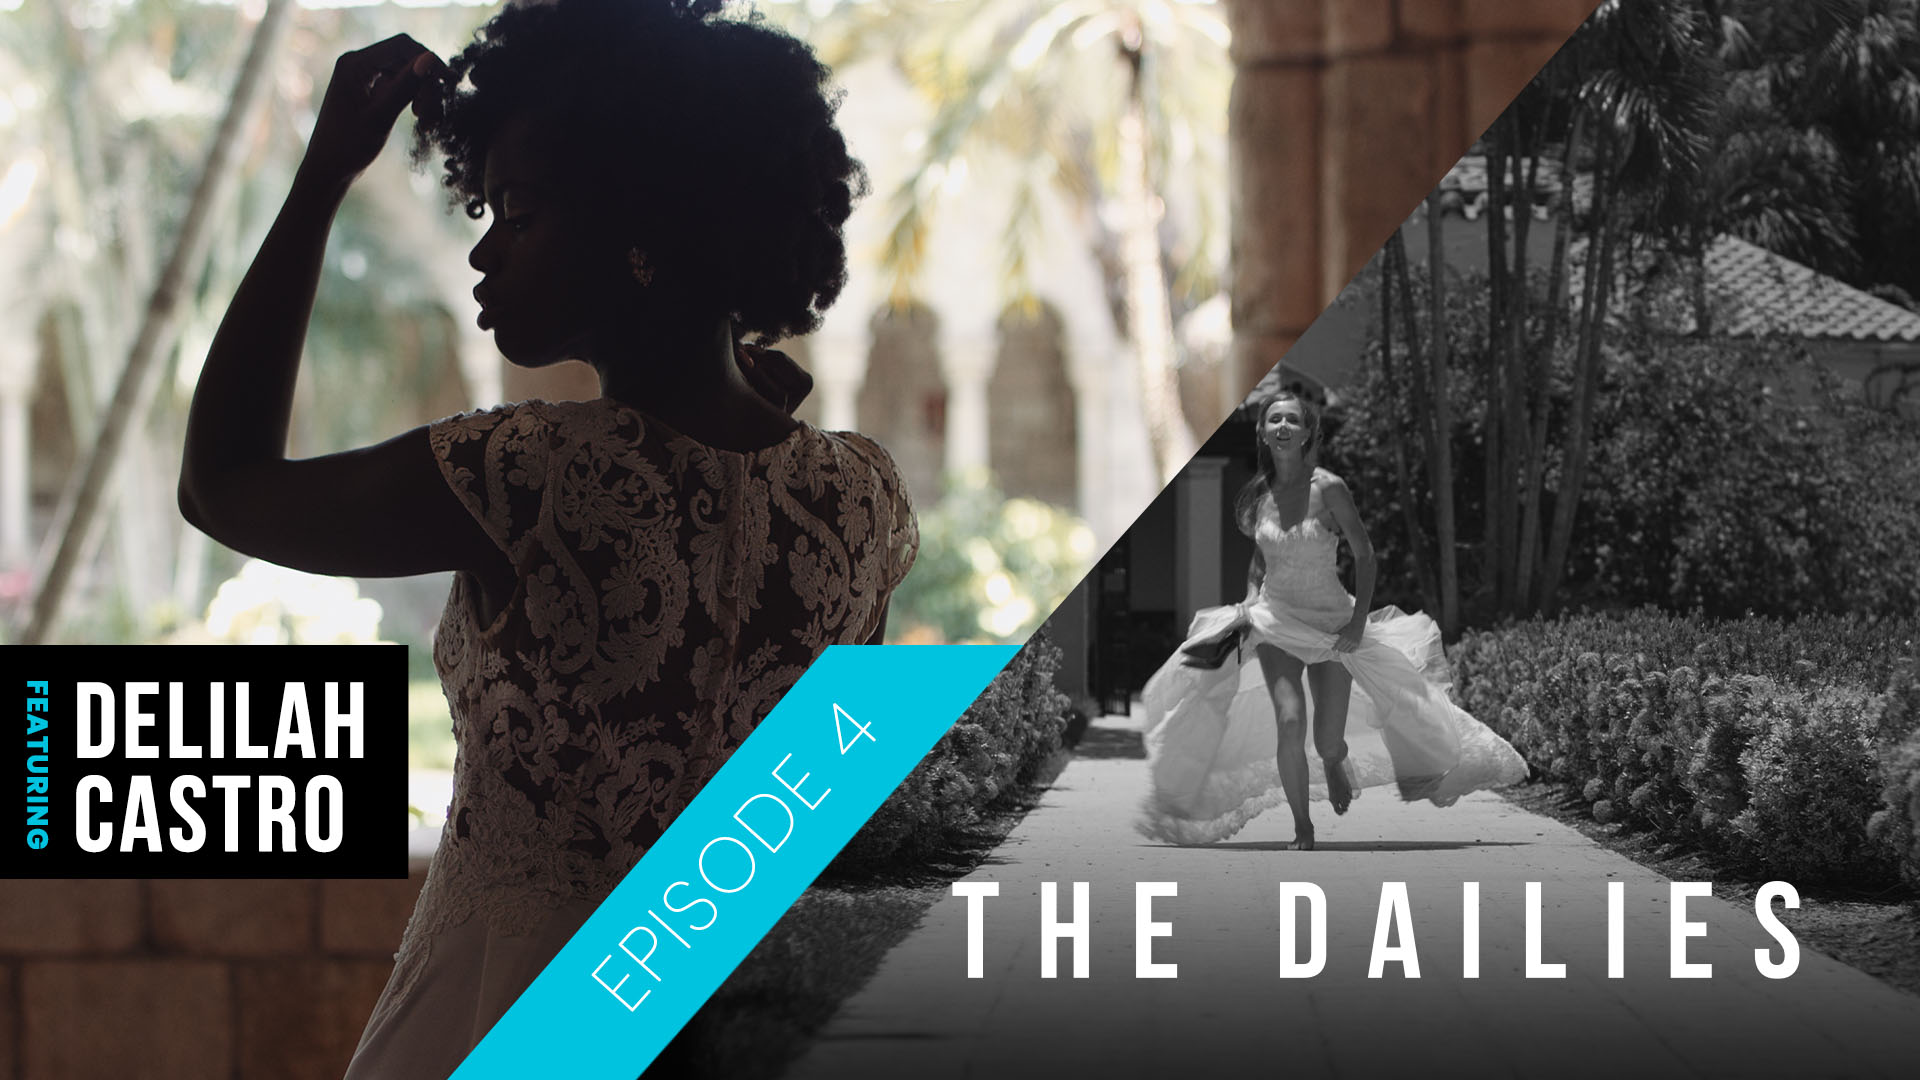 Dailies Episode 4 Delilah Castro Wedding Dresses ad with view from behind of woman with curly hair in a wedding dress and black and white image of woman in a wedding dress running down a path